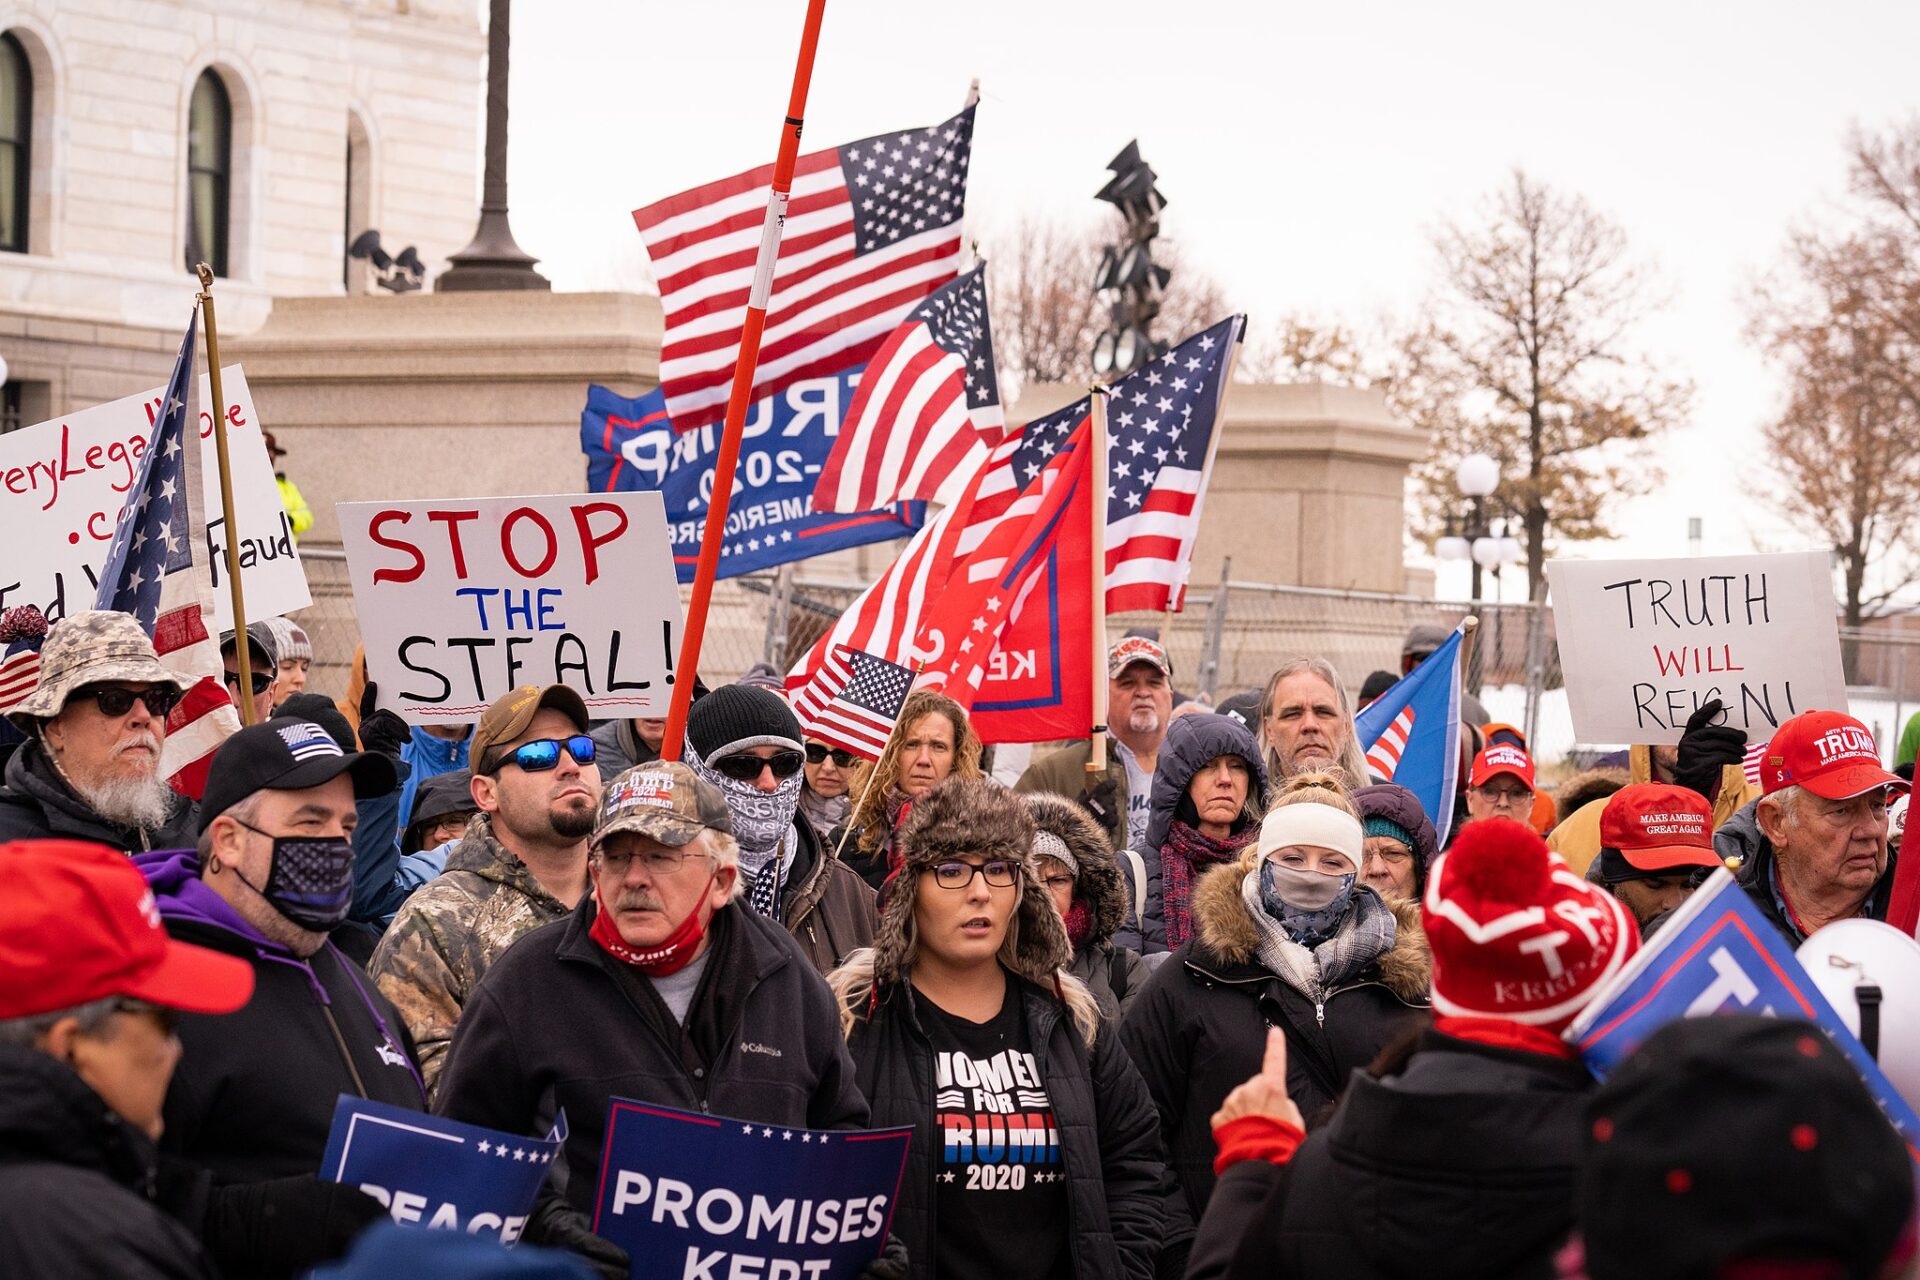 On Nov. 14, 2020, Trump supporters "Stop The Steal" followers rallied outside the Minnesota State Capitol (Chad Davis via Wikimedia Commons)